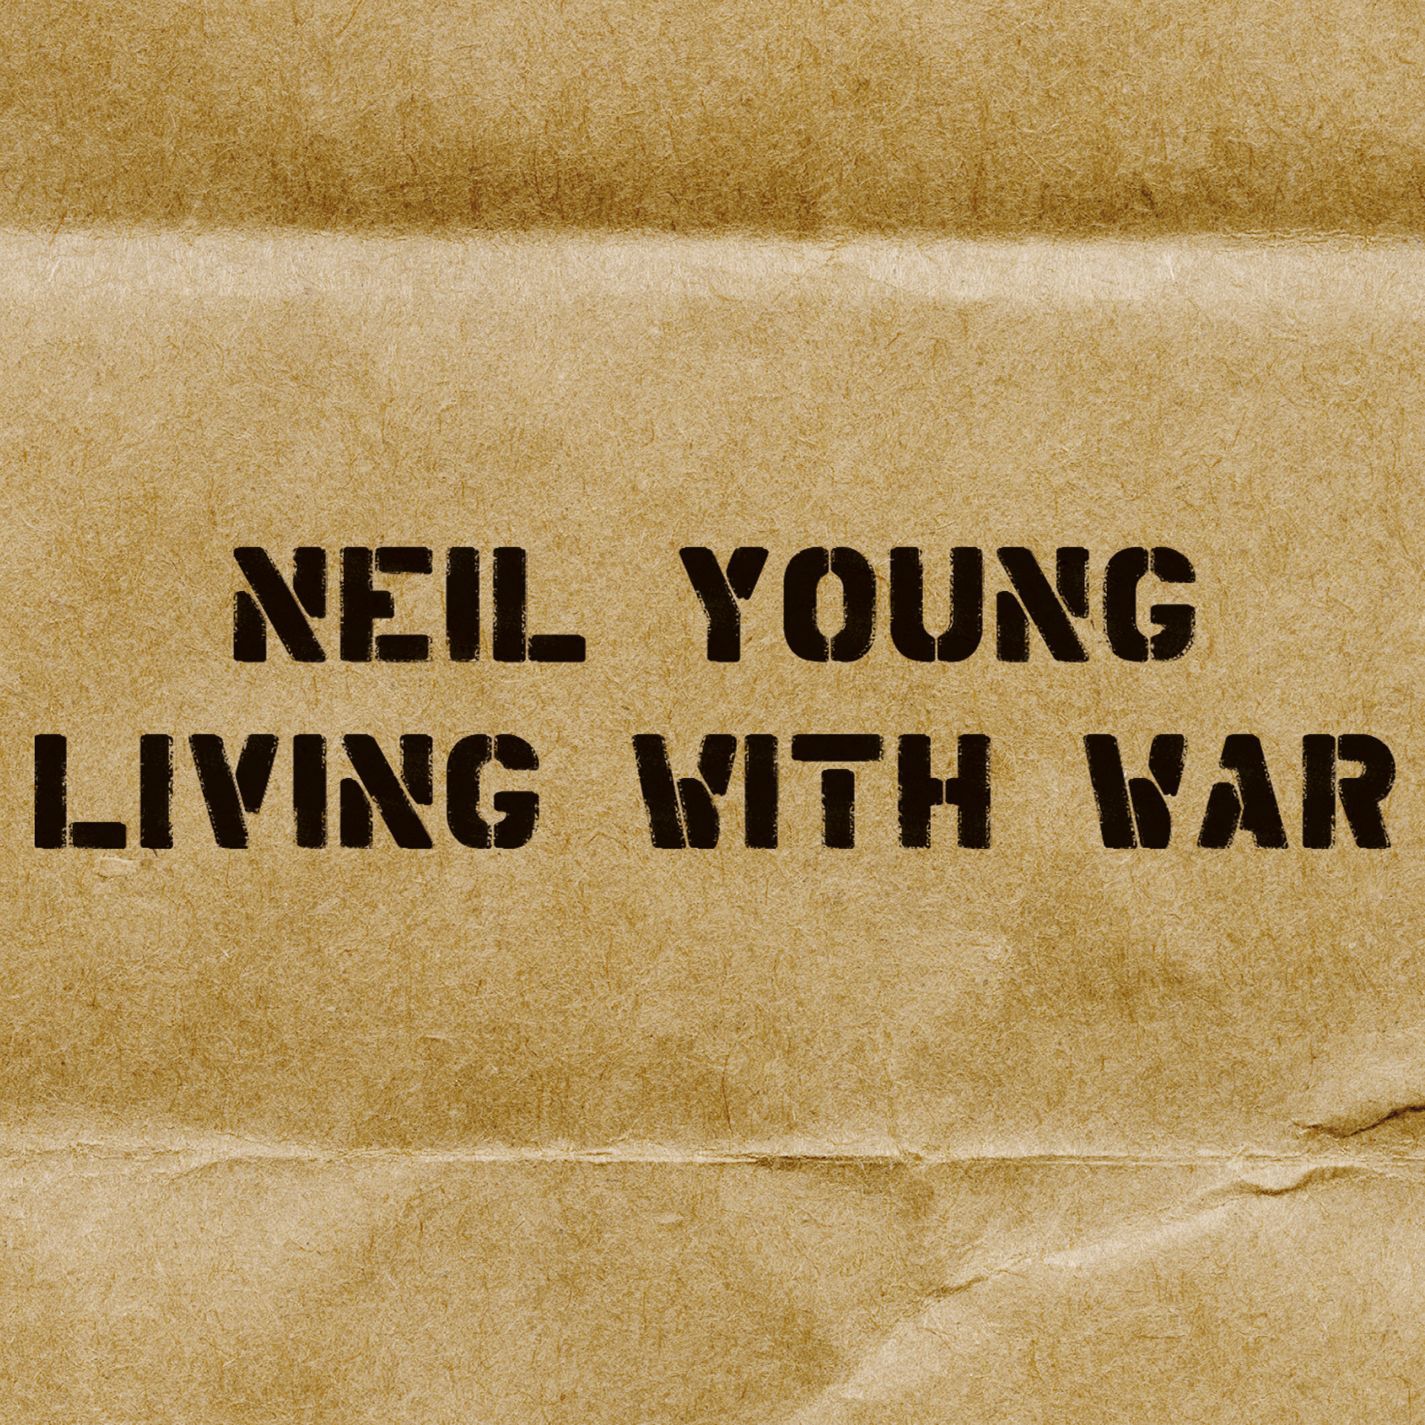 Neil Young - 2006 - Living With War [2016] 24-96